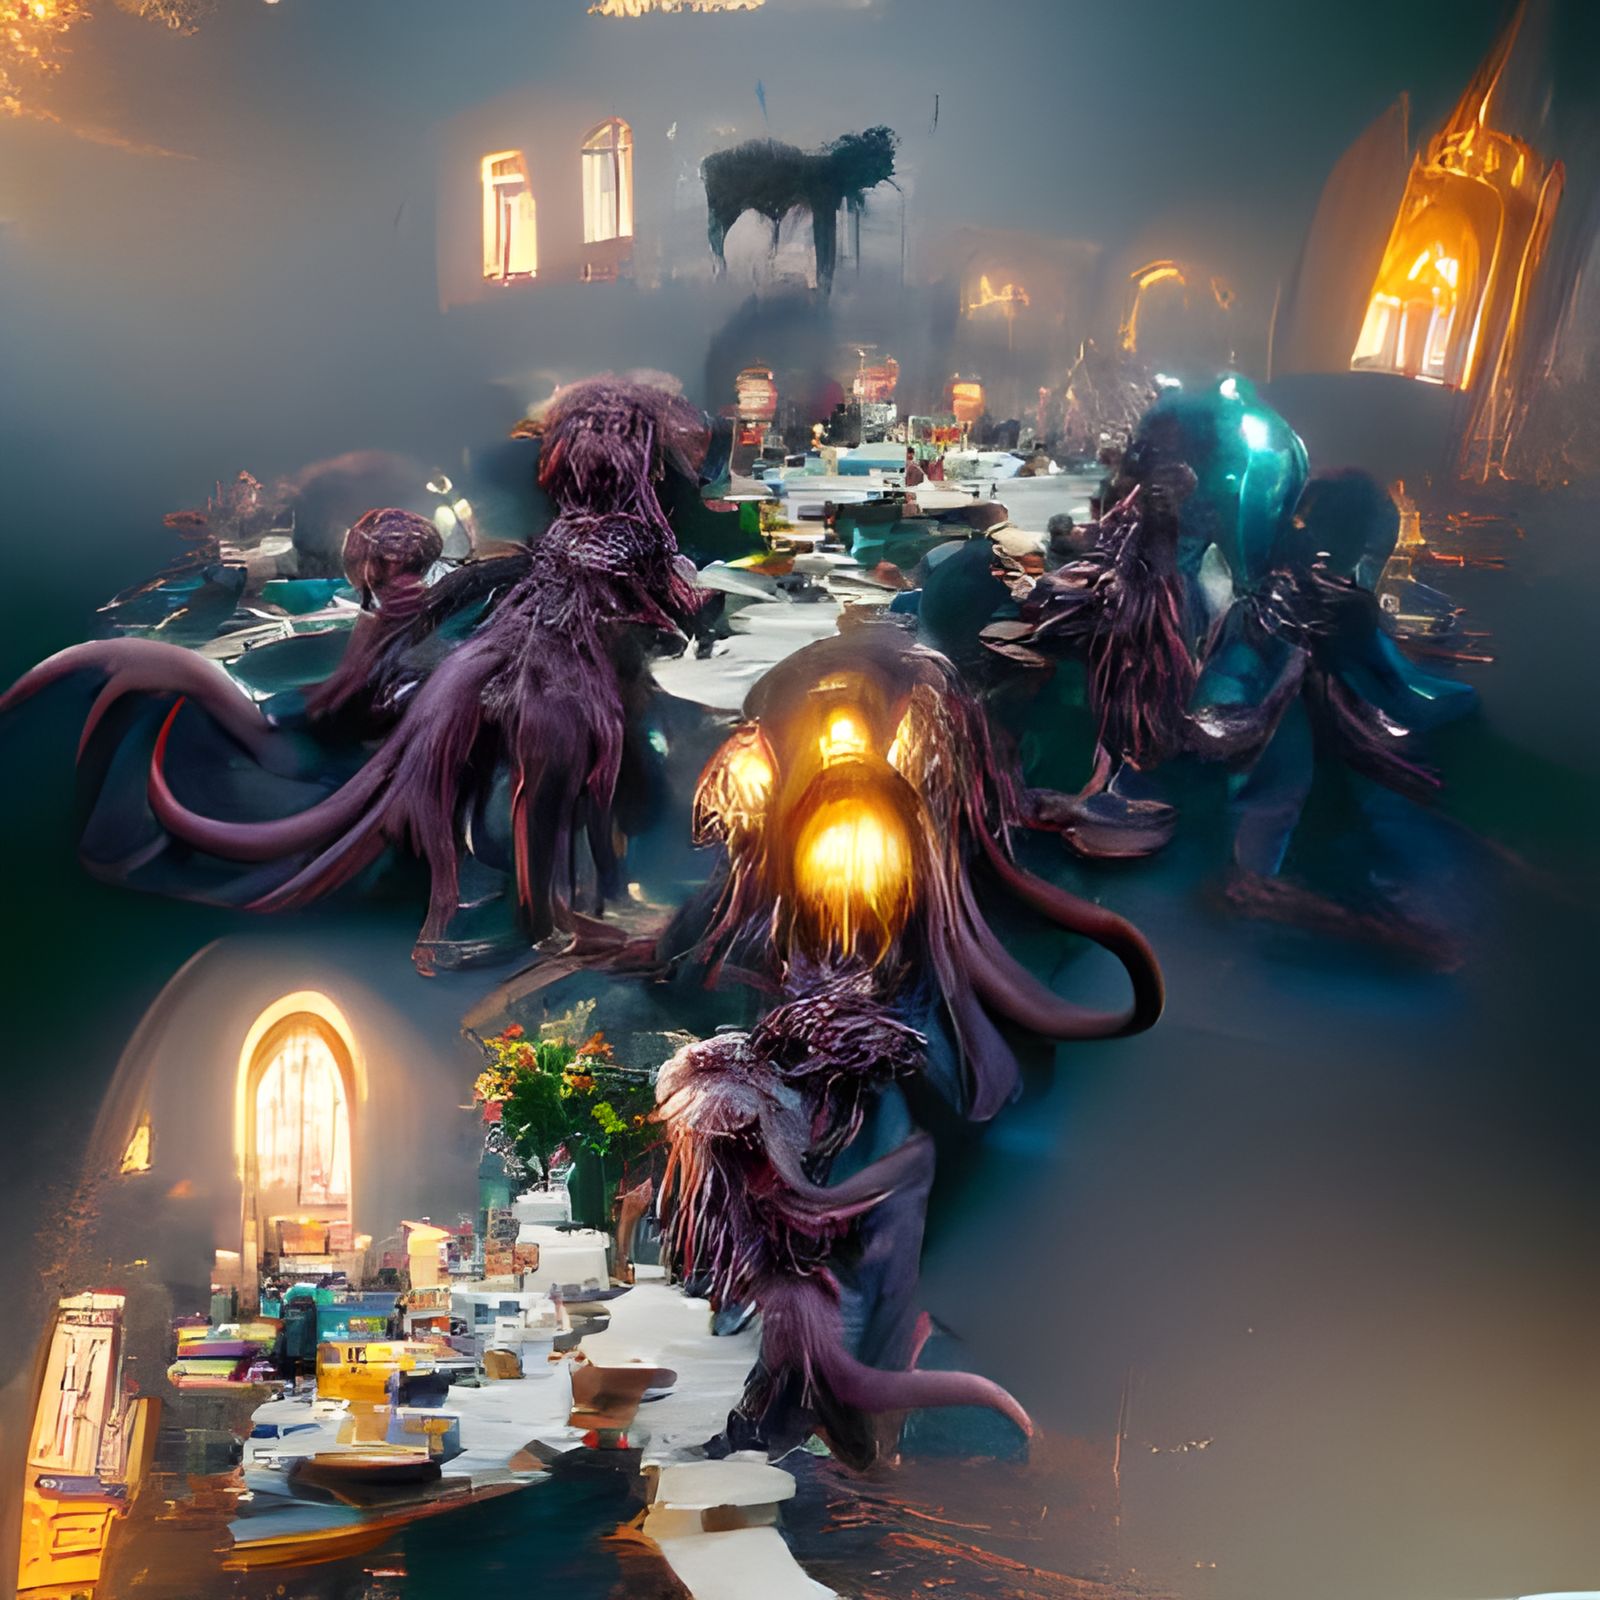 Cthulhu Mythos at the Last Supper.